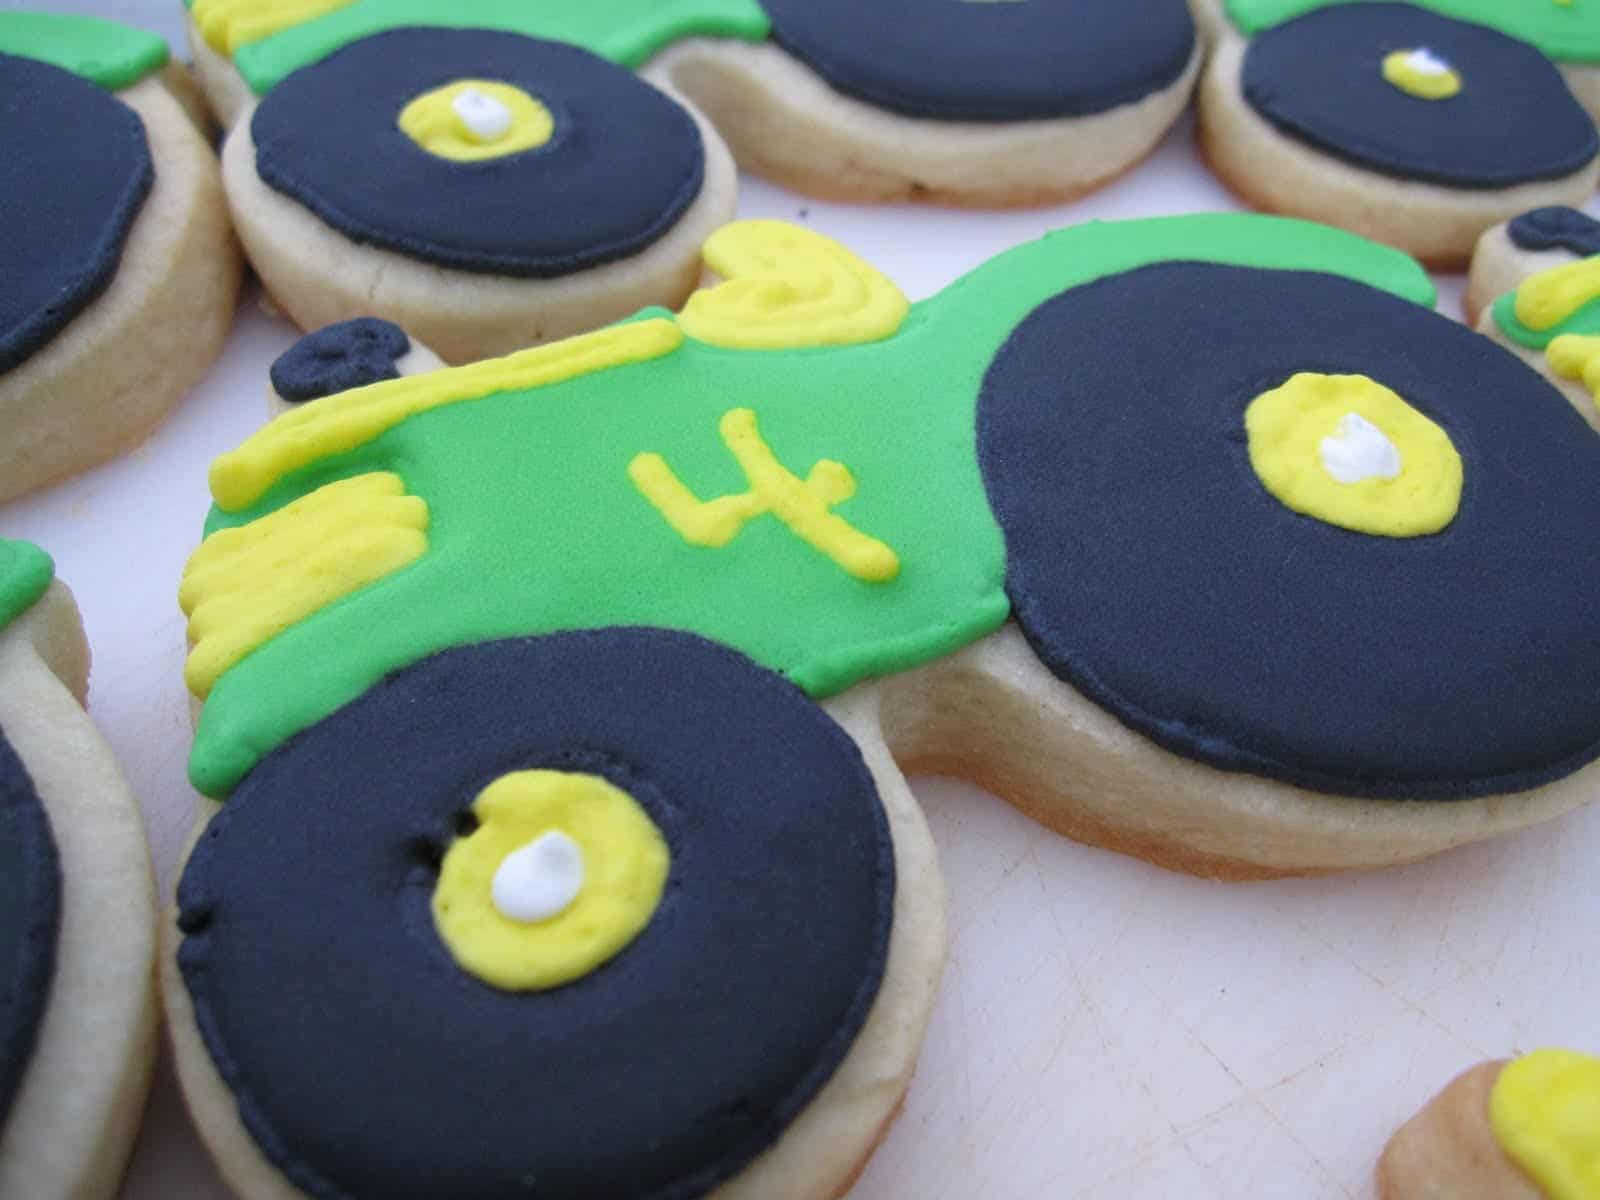 Overhead view of tractor decorated cookies with the number 4 on them